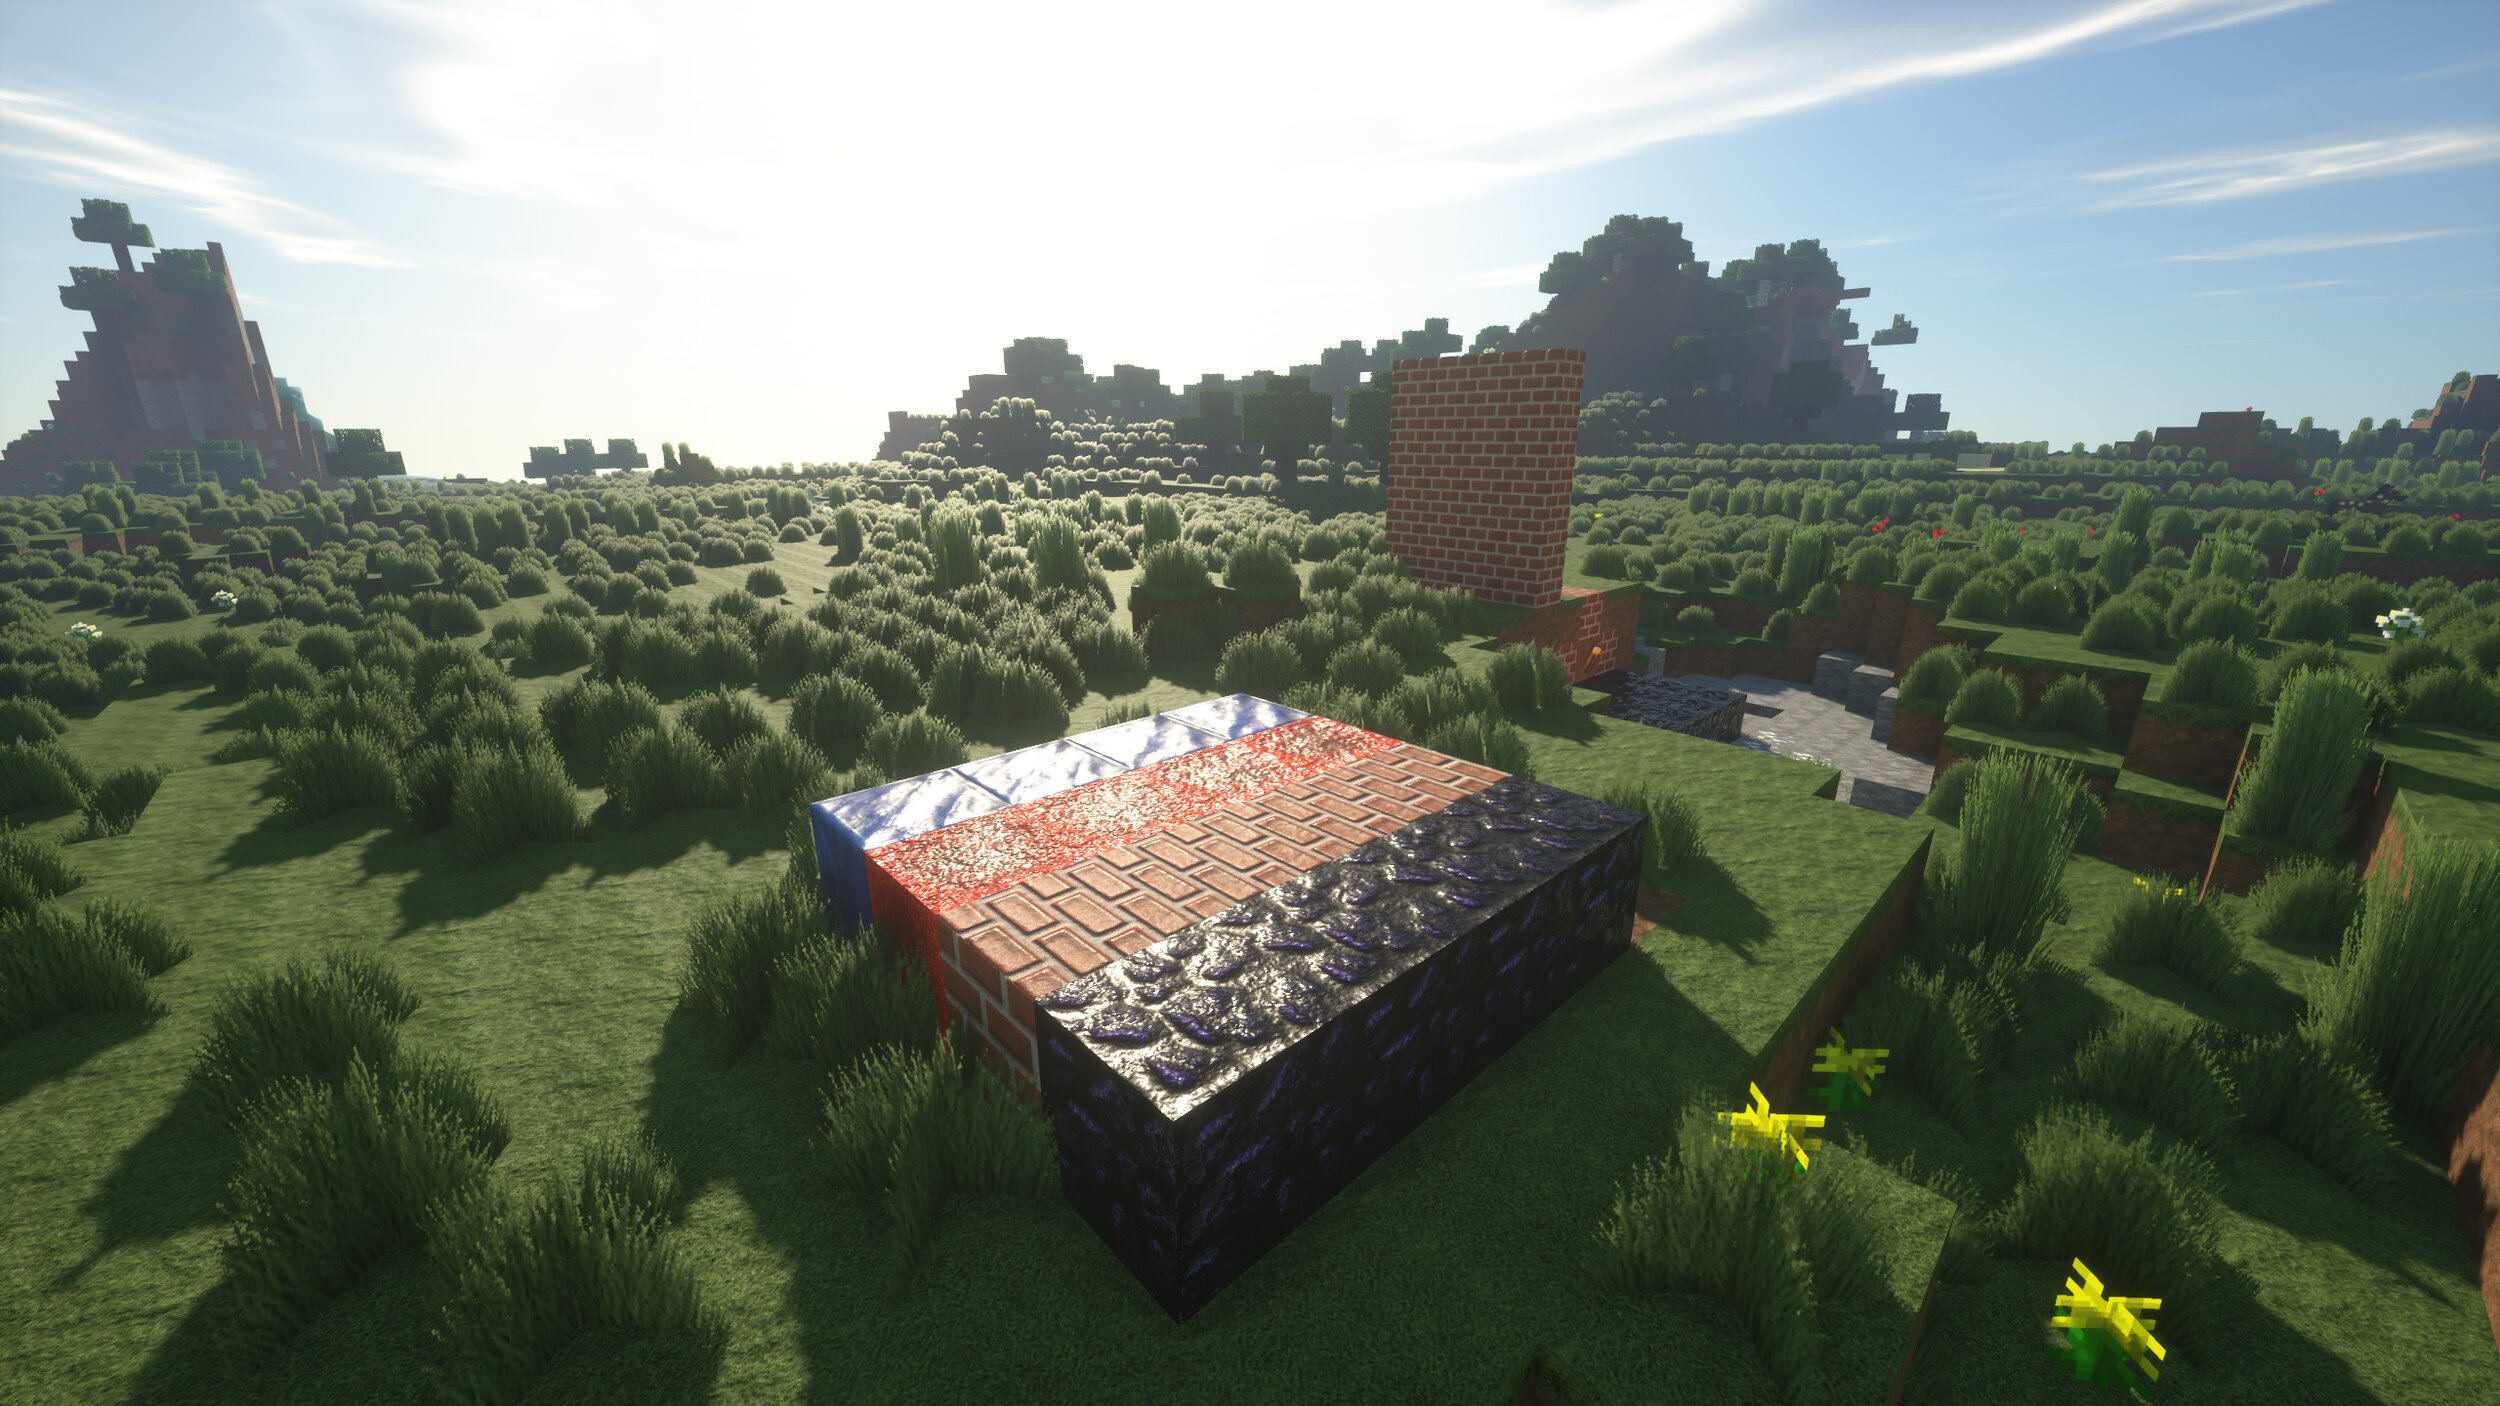 Scene in Minecraft raytraced with Sonic Ether’s Unbelievable Shaders Image Credit: https://www.sonicether.com/seus/